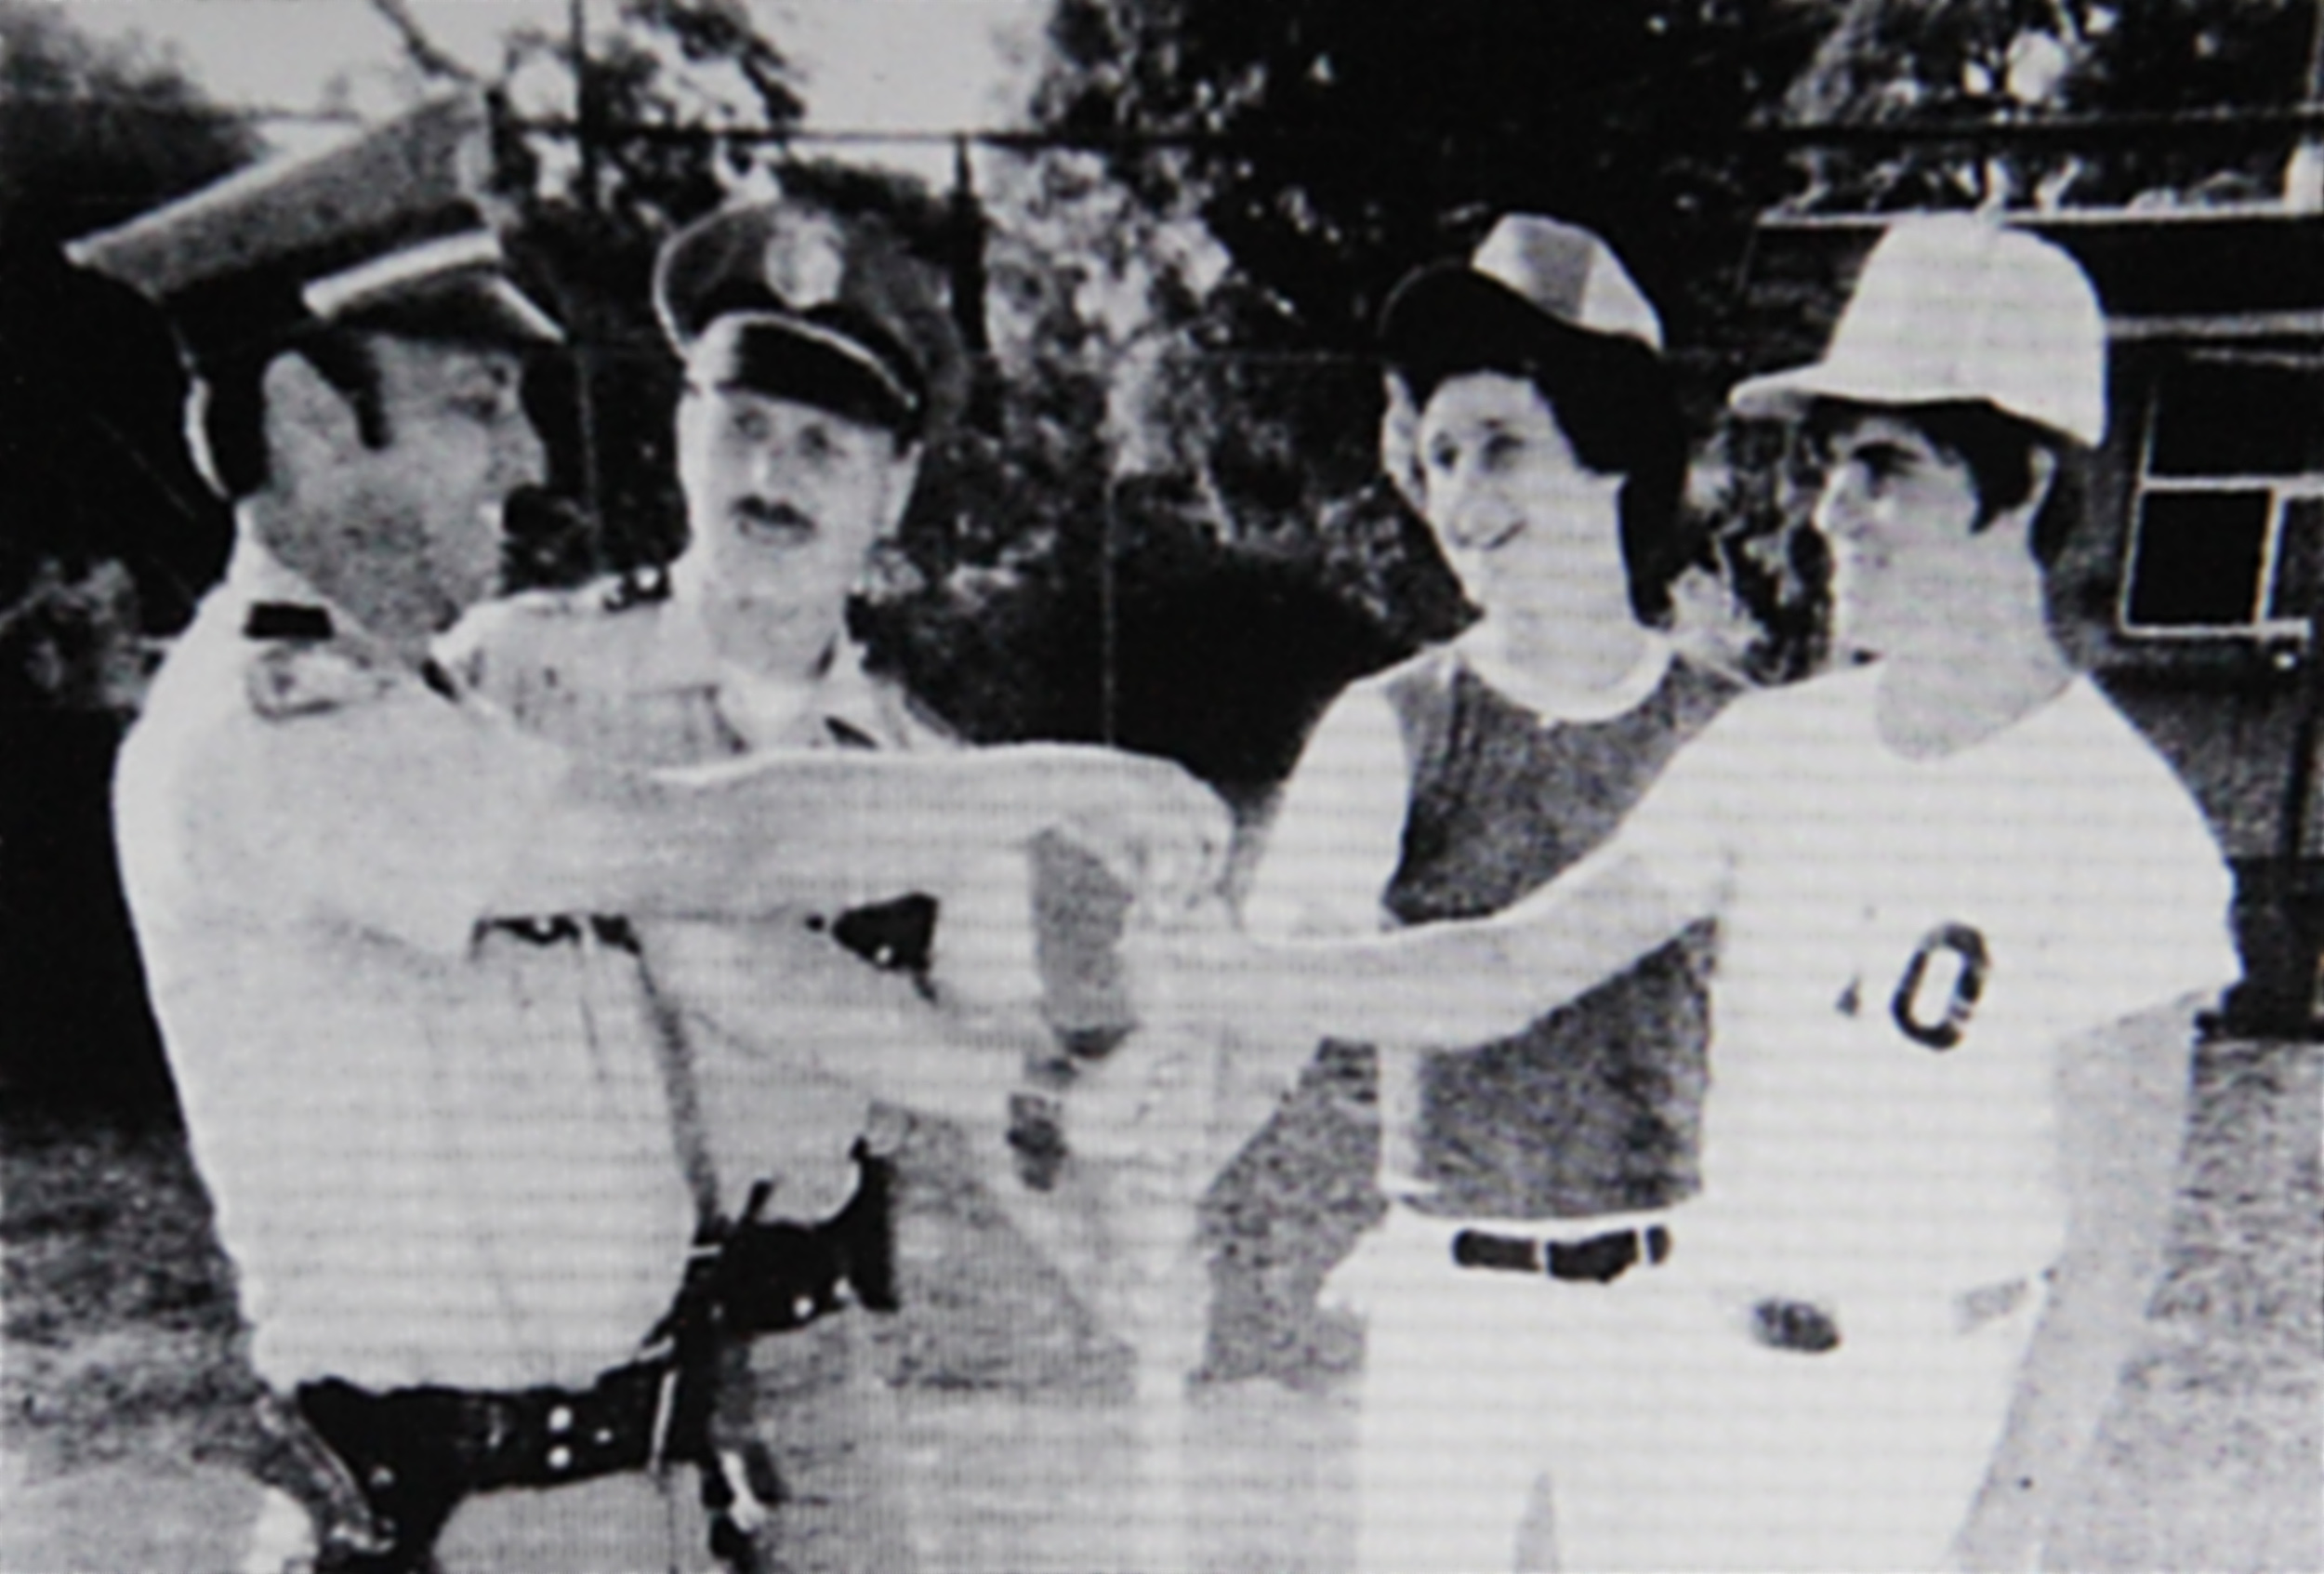 PHOTO: Suspected "Golden State Killer," Joseph James DeAngelo is the police officer on the right in a photo from 1979.